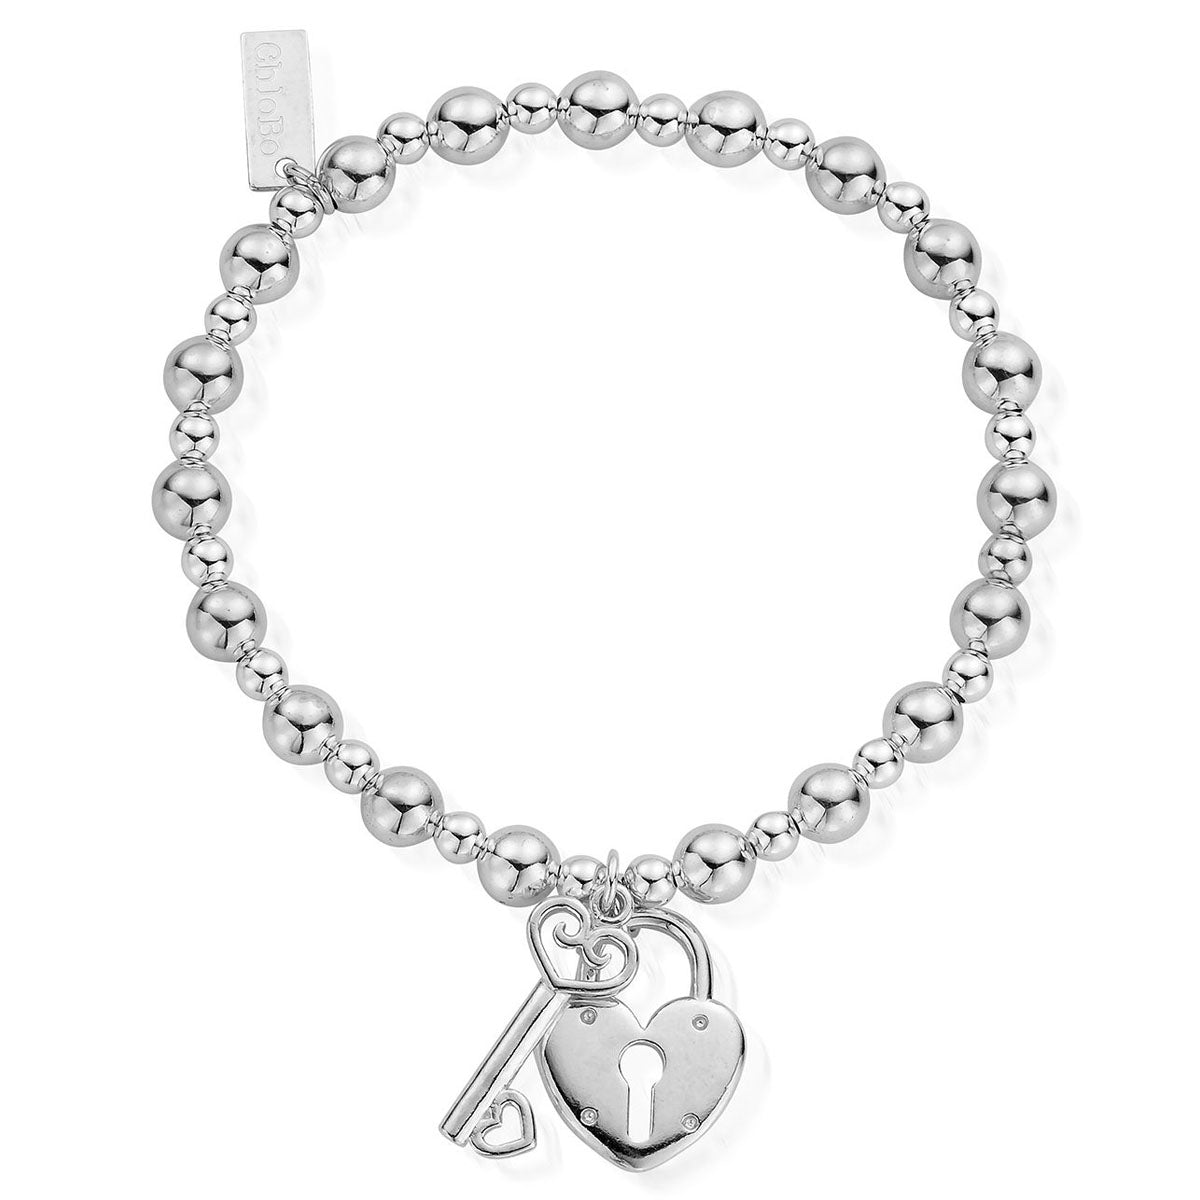 VIEN Newest Design Engraved Lock and Key Stainless Steel Couple Bracelet  Pendant Necklace Set for Boys, Girls, Men & Women : Amazon.in: Jewellery